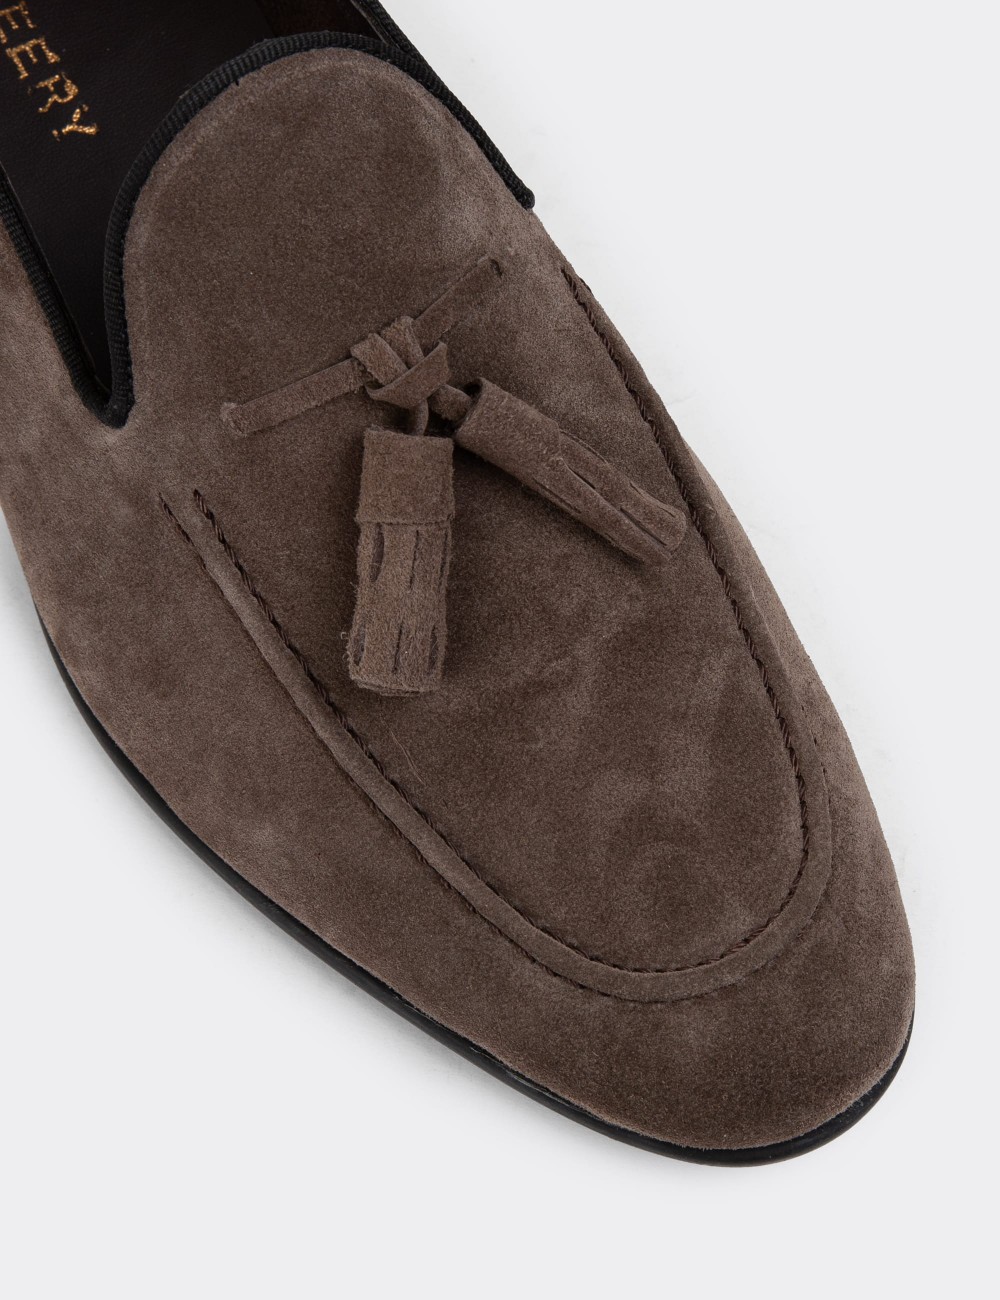 Sandstone Suede Leather Loafers - 01701MVZNC04